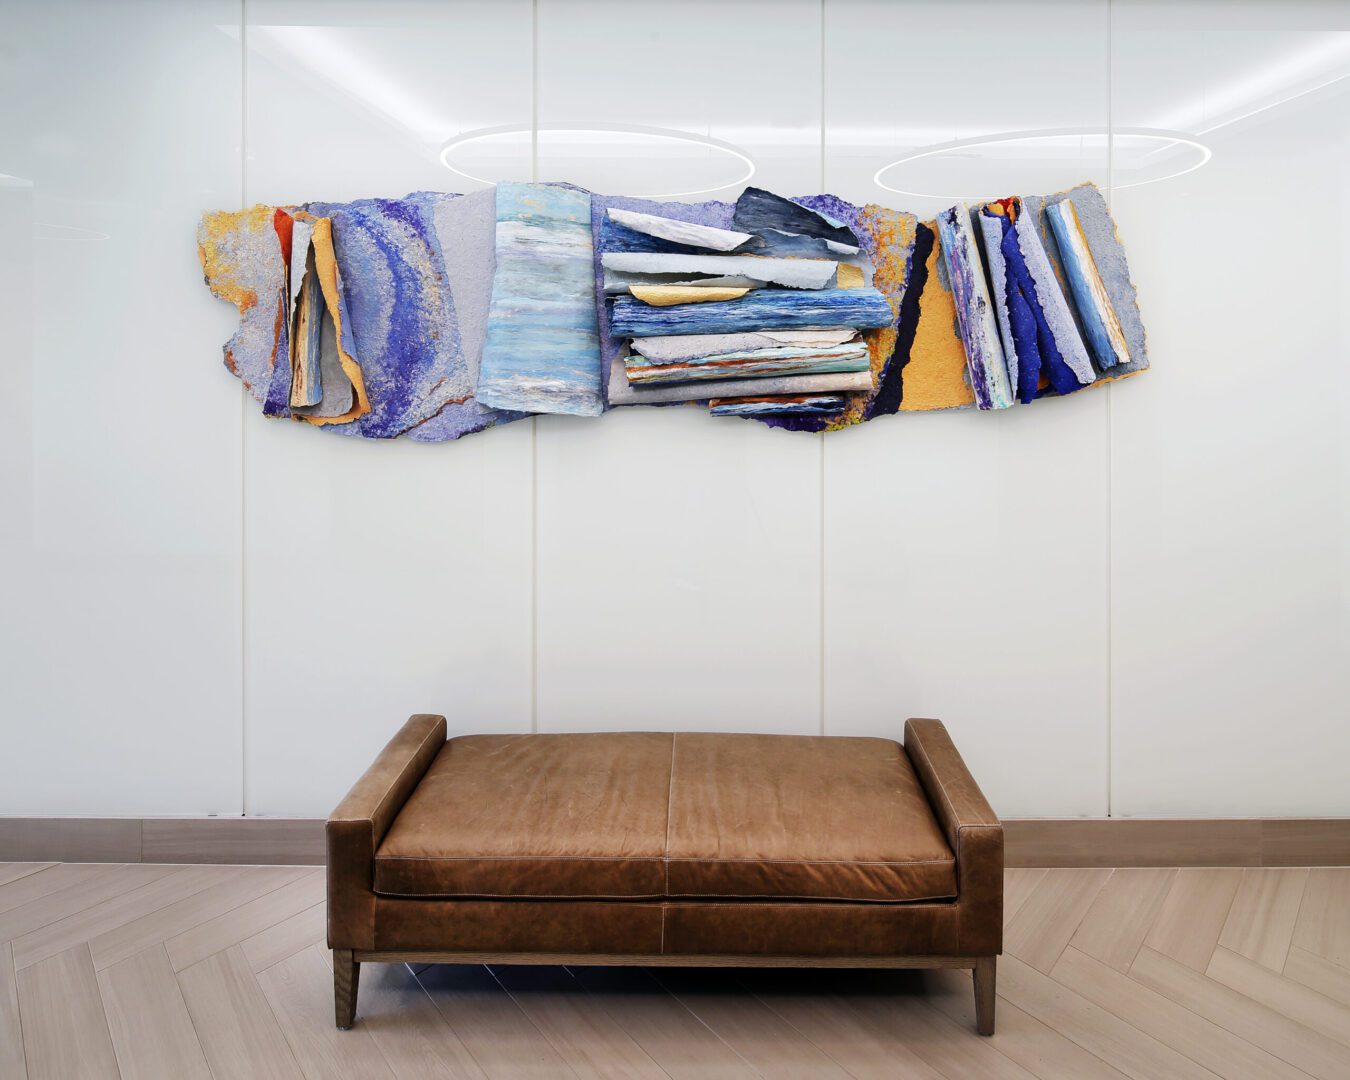 Sea Foam I, (2019). Mixed Media Wall Sculpture. 122 x 33 inches. Corporate Collection: Westport CT.